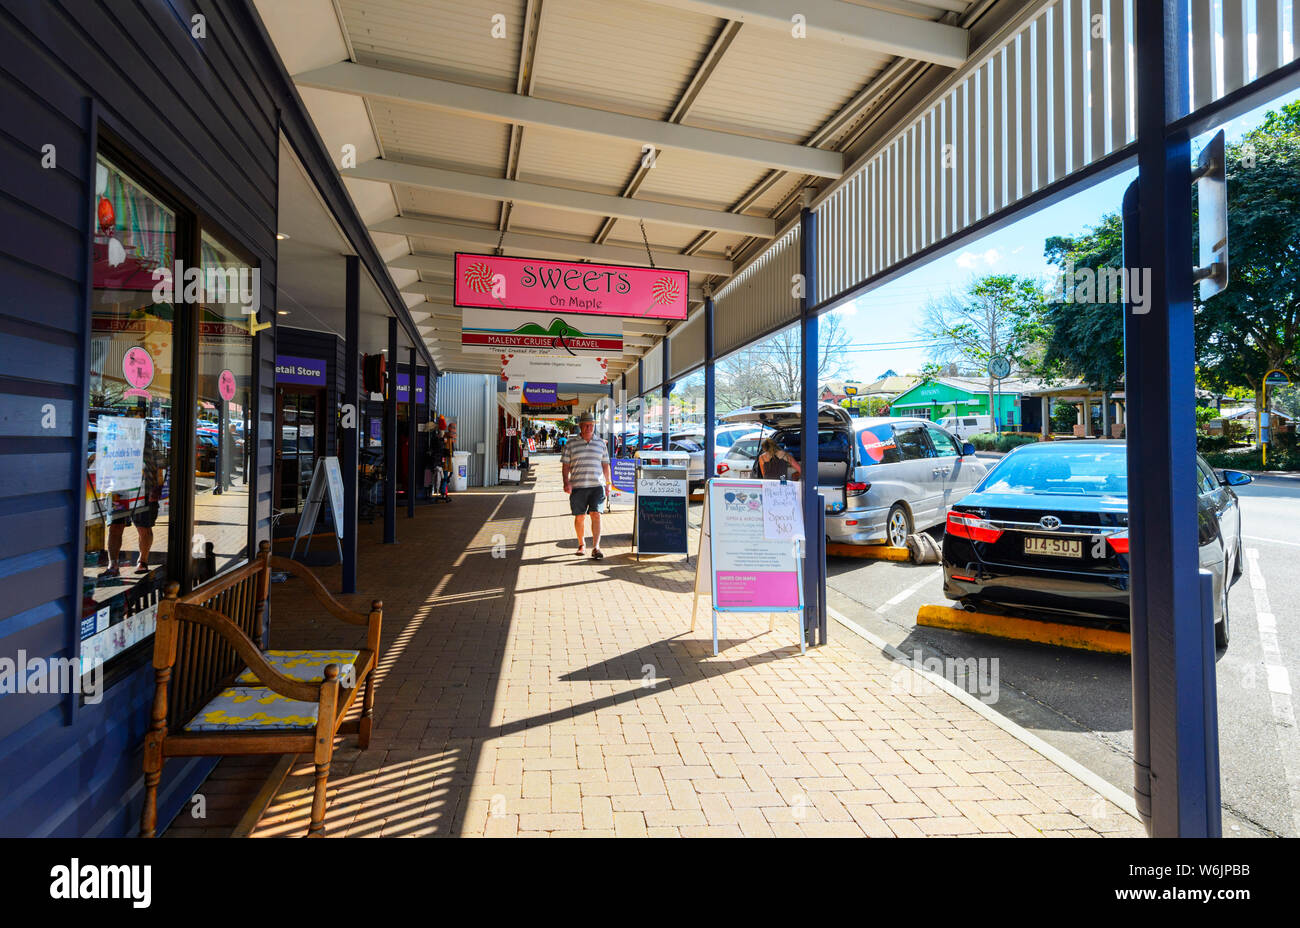 Shops and verandah in the main street of the small rural town of Maleny, Queensland, QLD, Australia Stock Photo